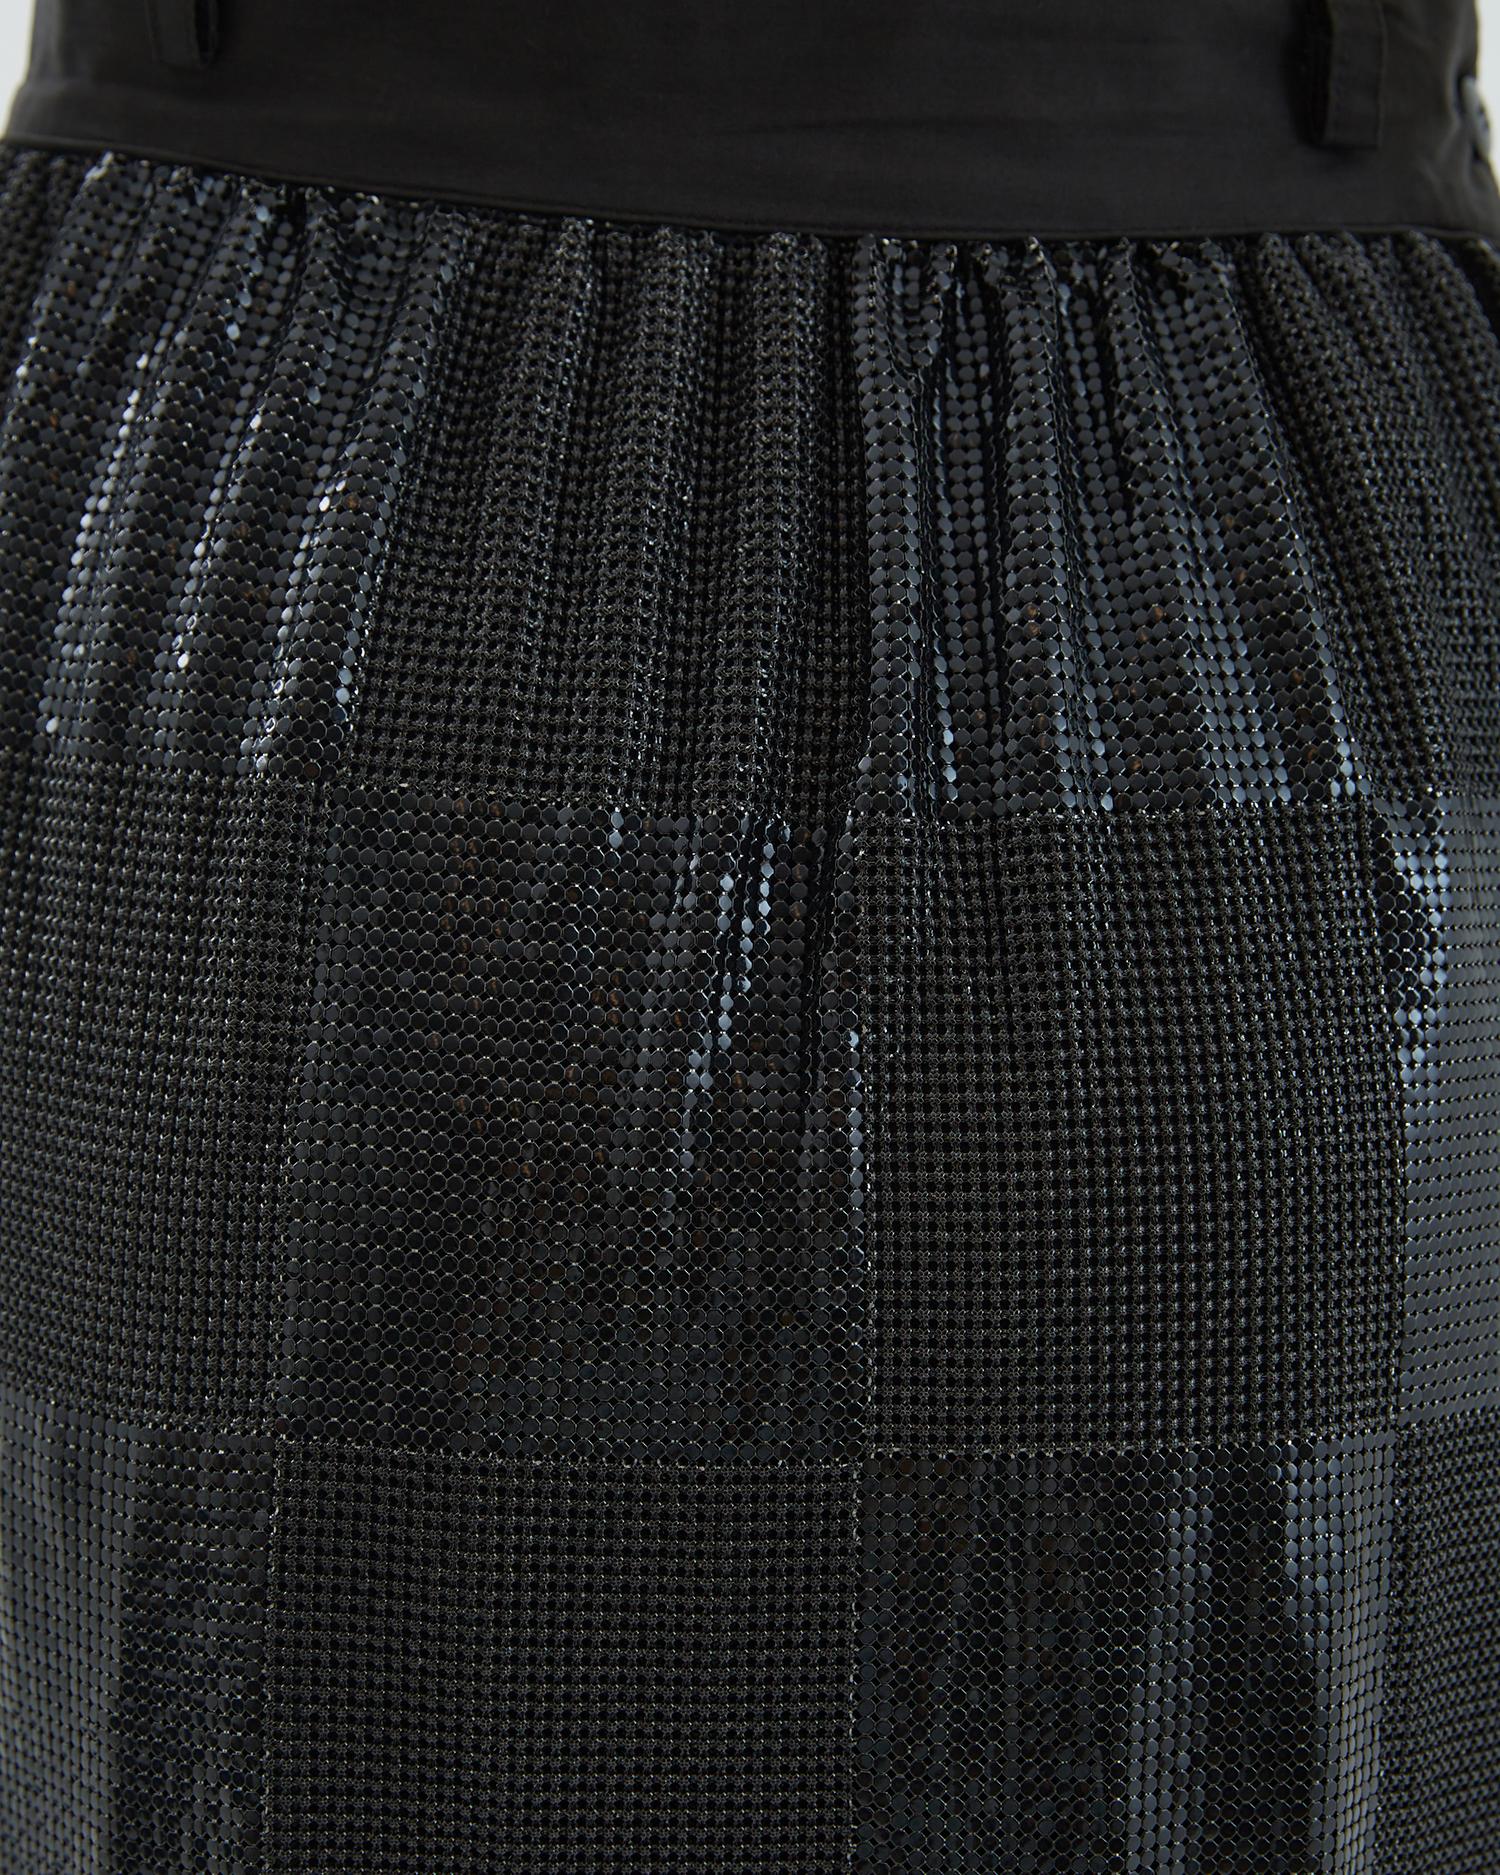 Gianni Versace F/W 1983 Black Oroton chainmail top and skirt set For Sale 14